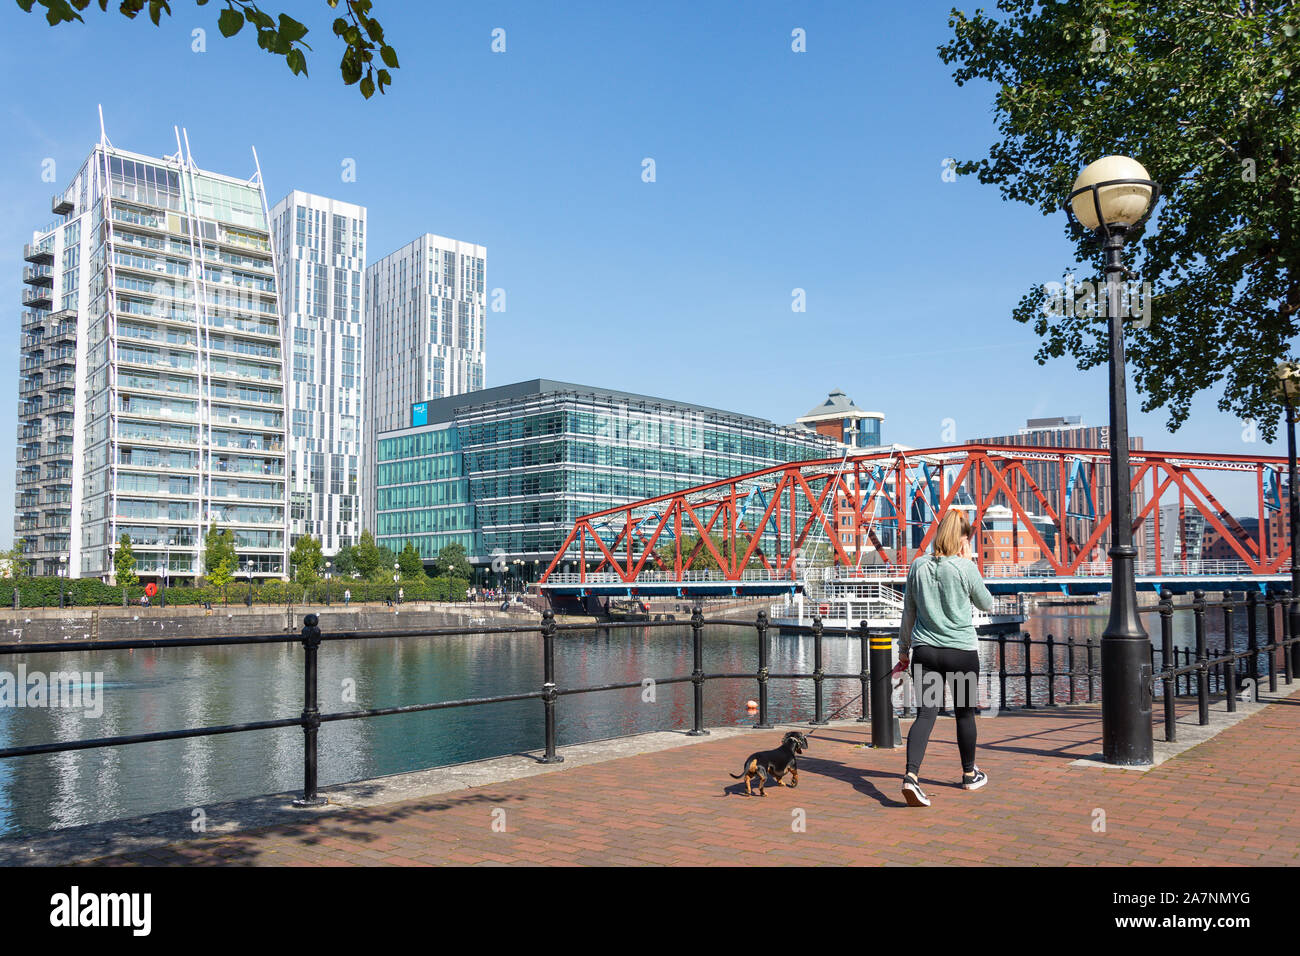 Huron Basin, Salford Quays, Salford, Greater Manchester, England, United Kingdom Stock Photo